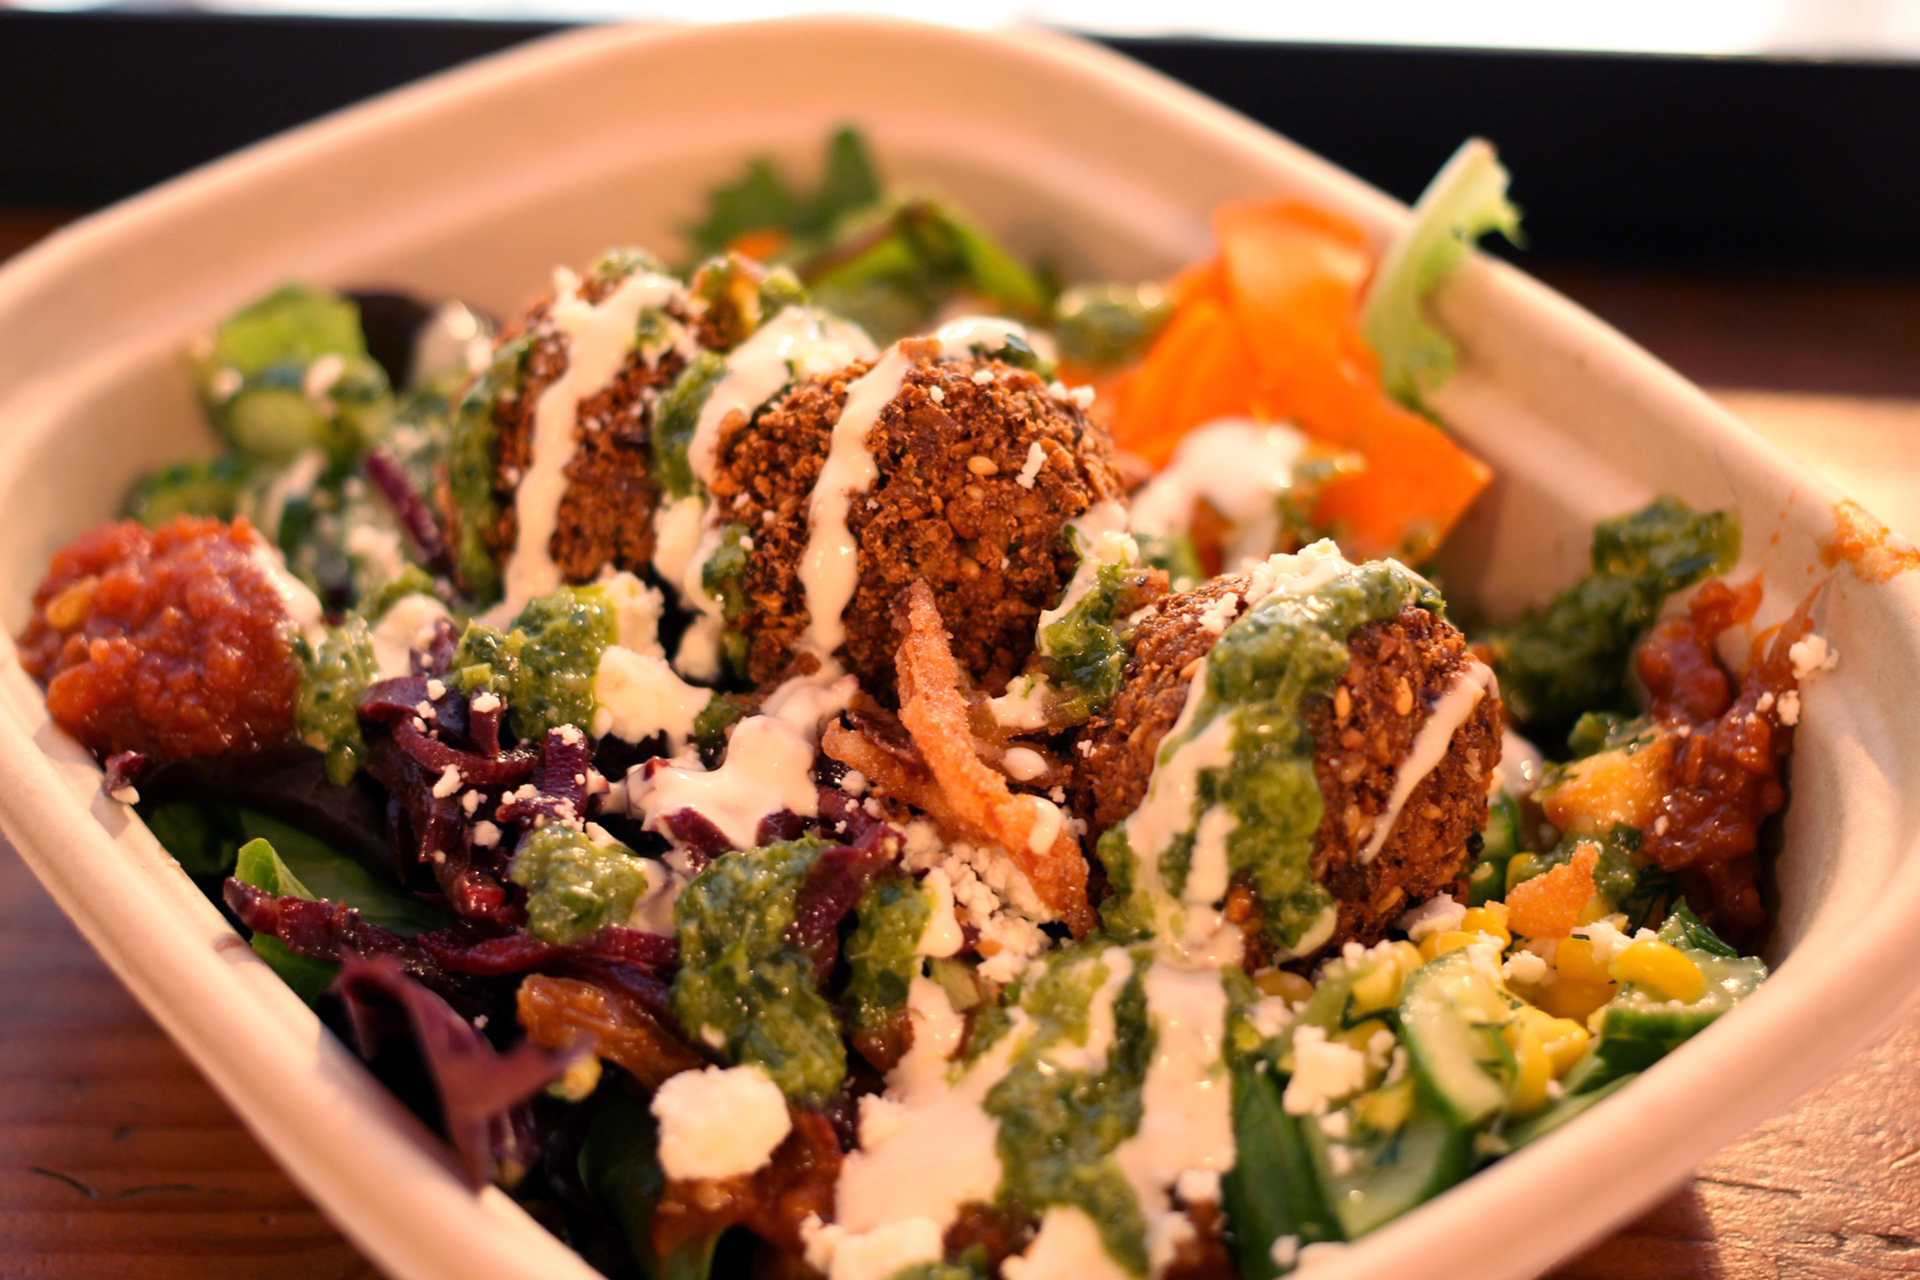 The falafel salad with all the toppings at Liba Falafel in Oakland.